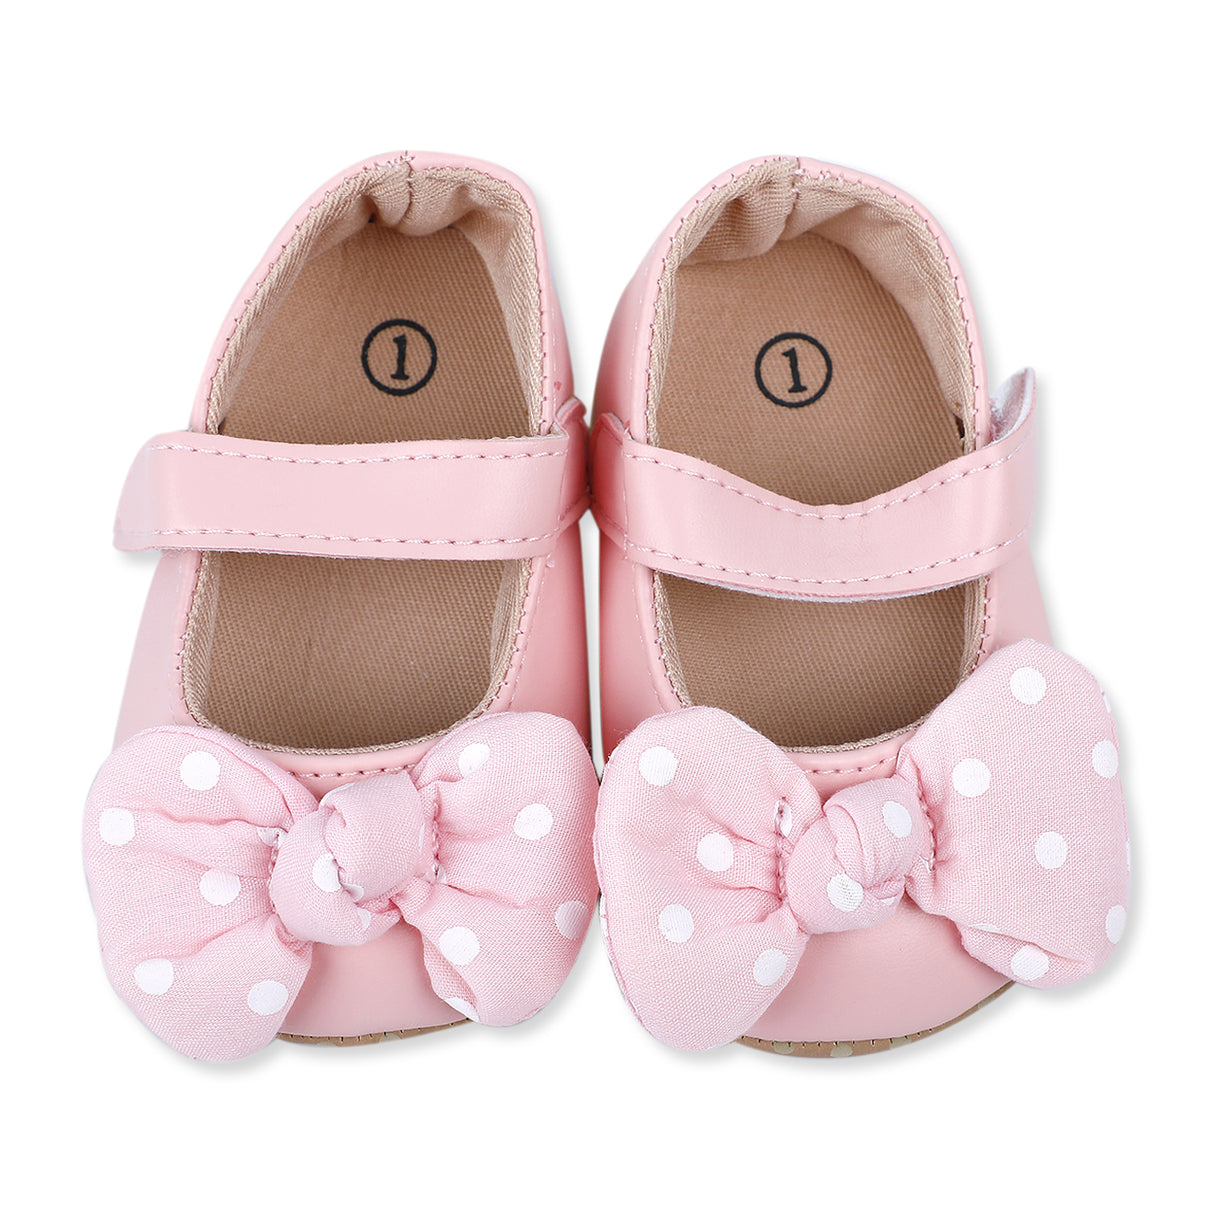 Dotted Bow Girls Anti-Skid Ballerina Booties